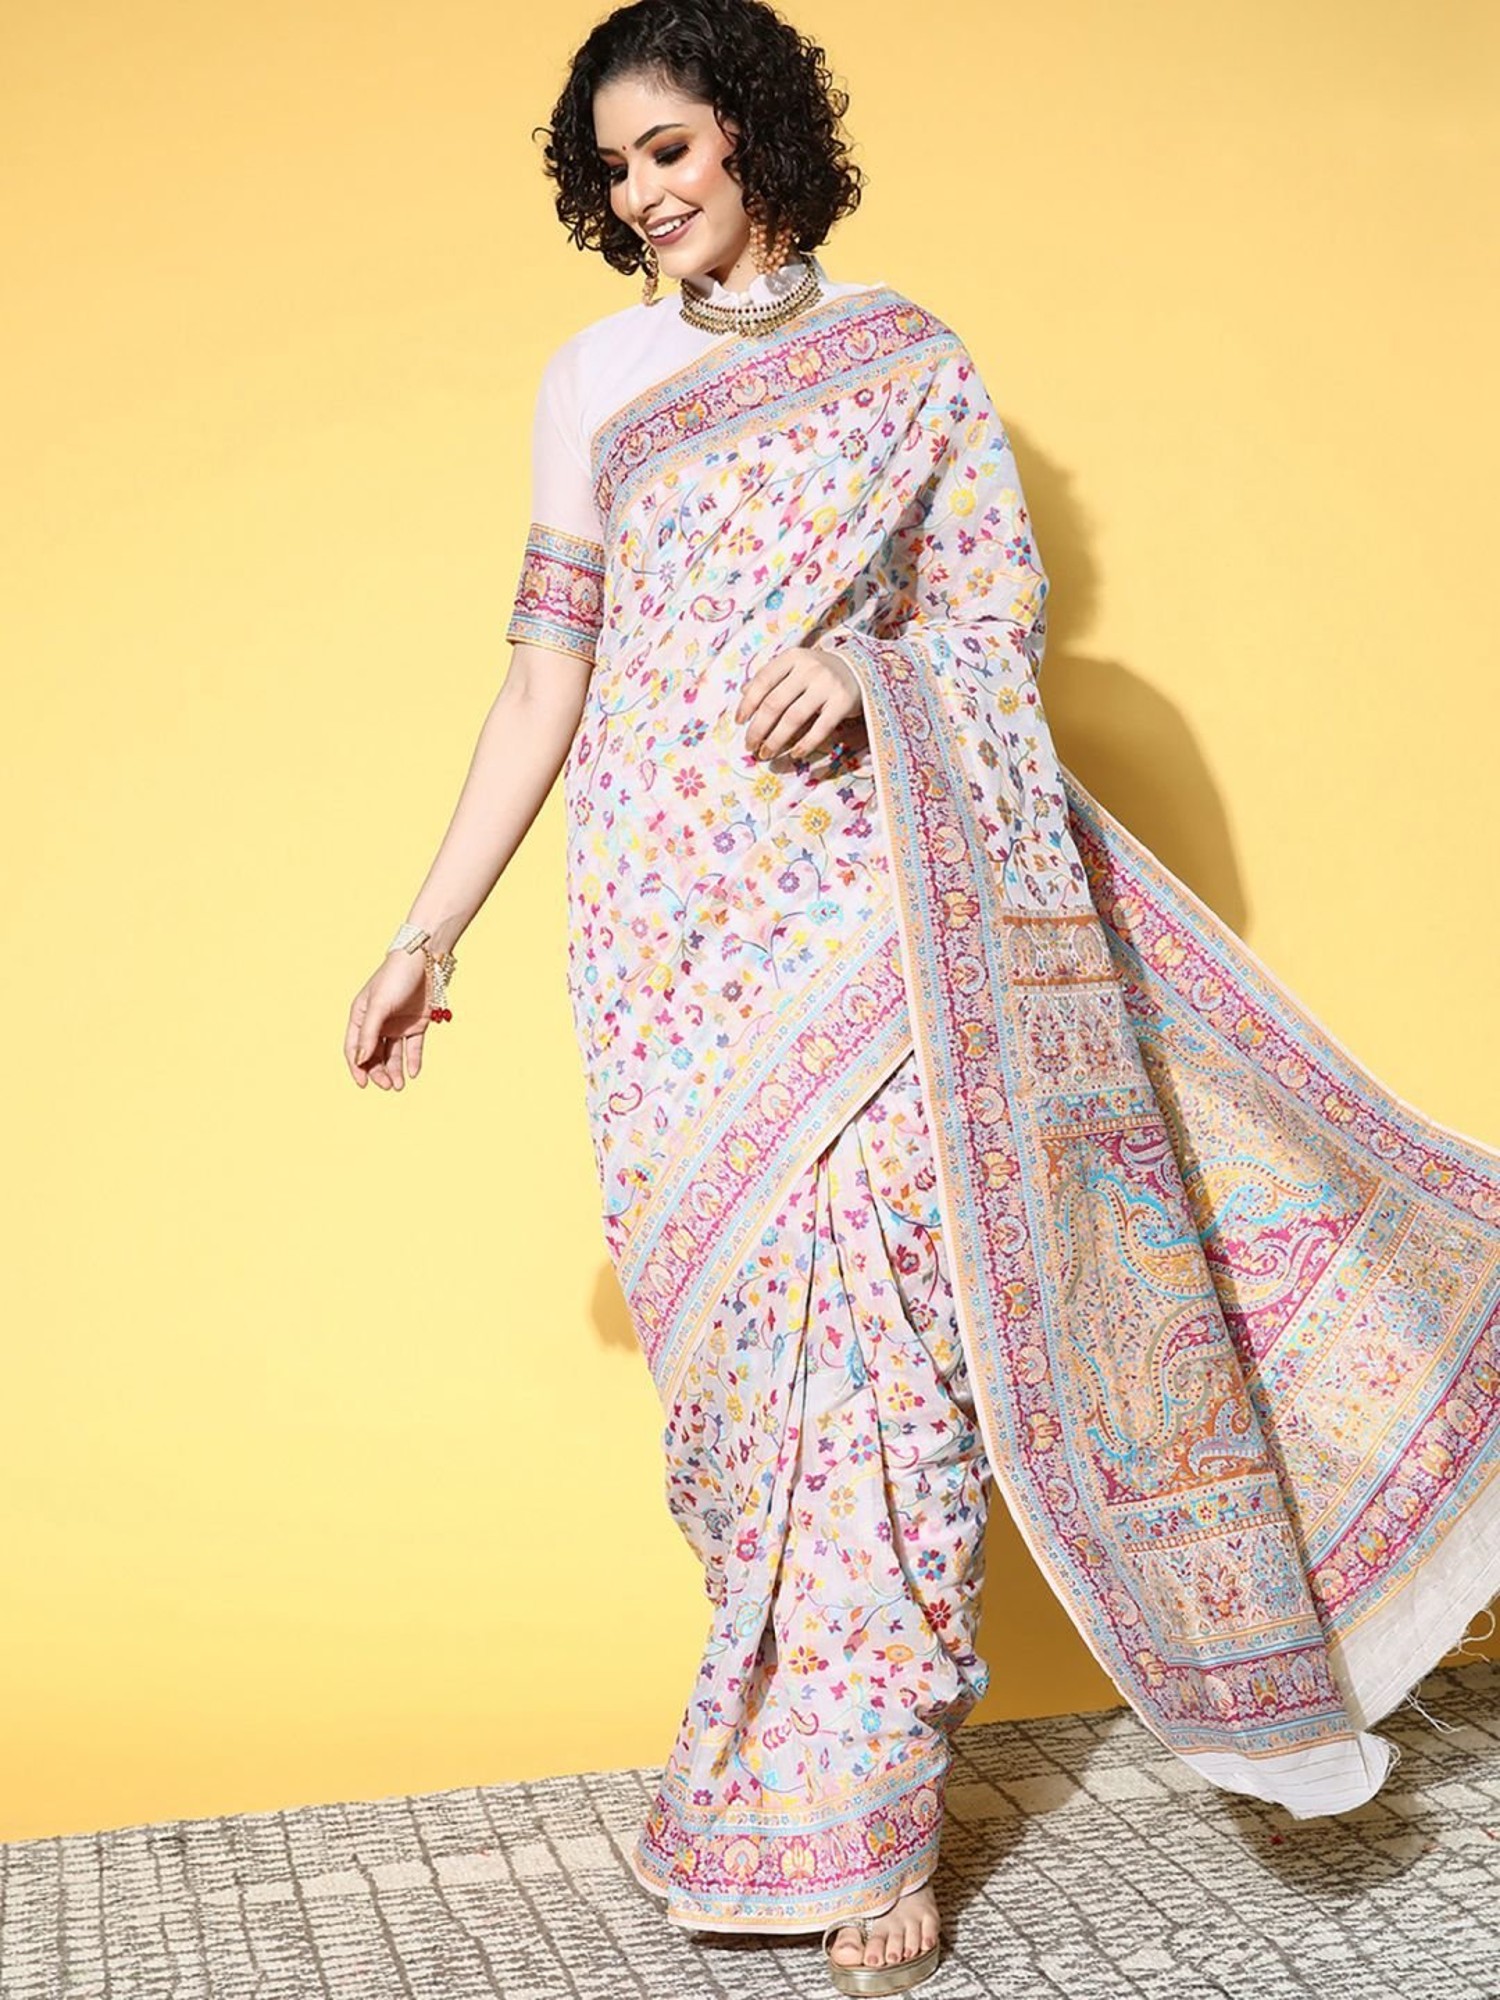 Pin on Saree Designs by Colorauction